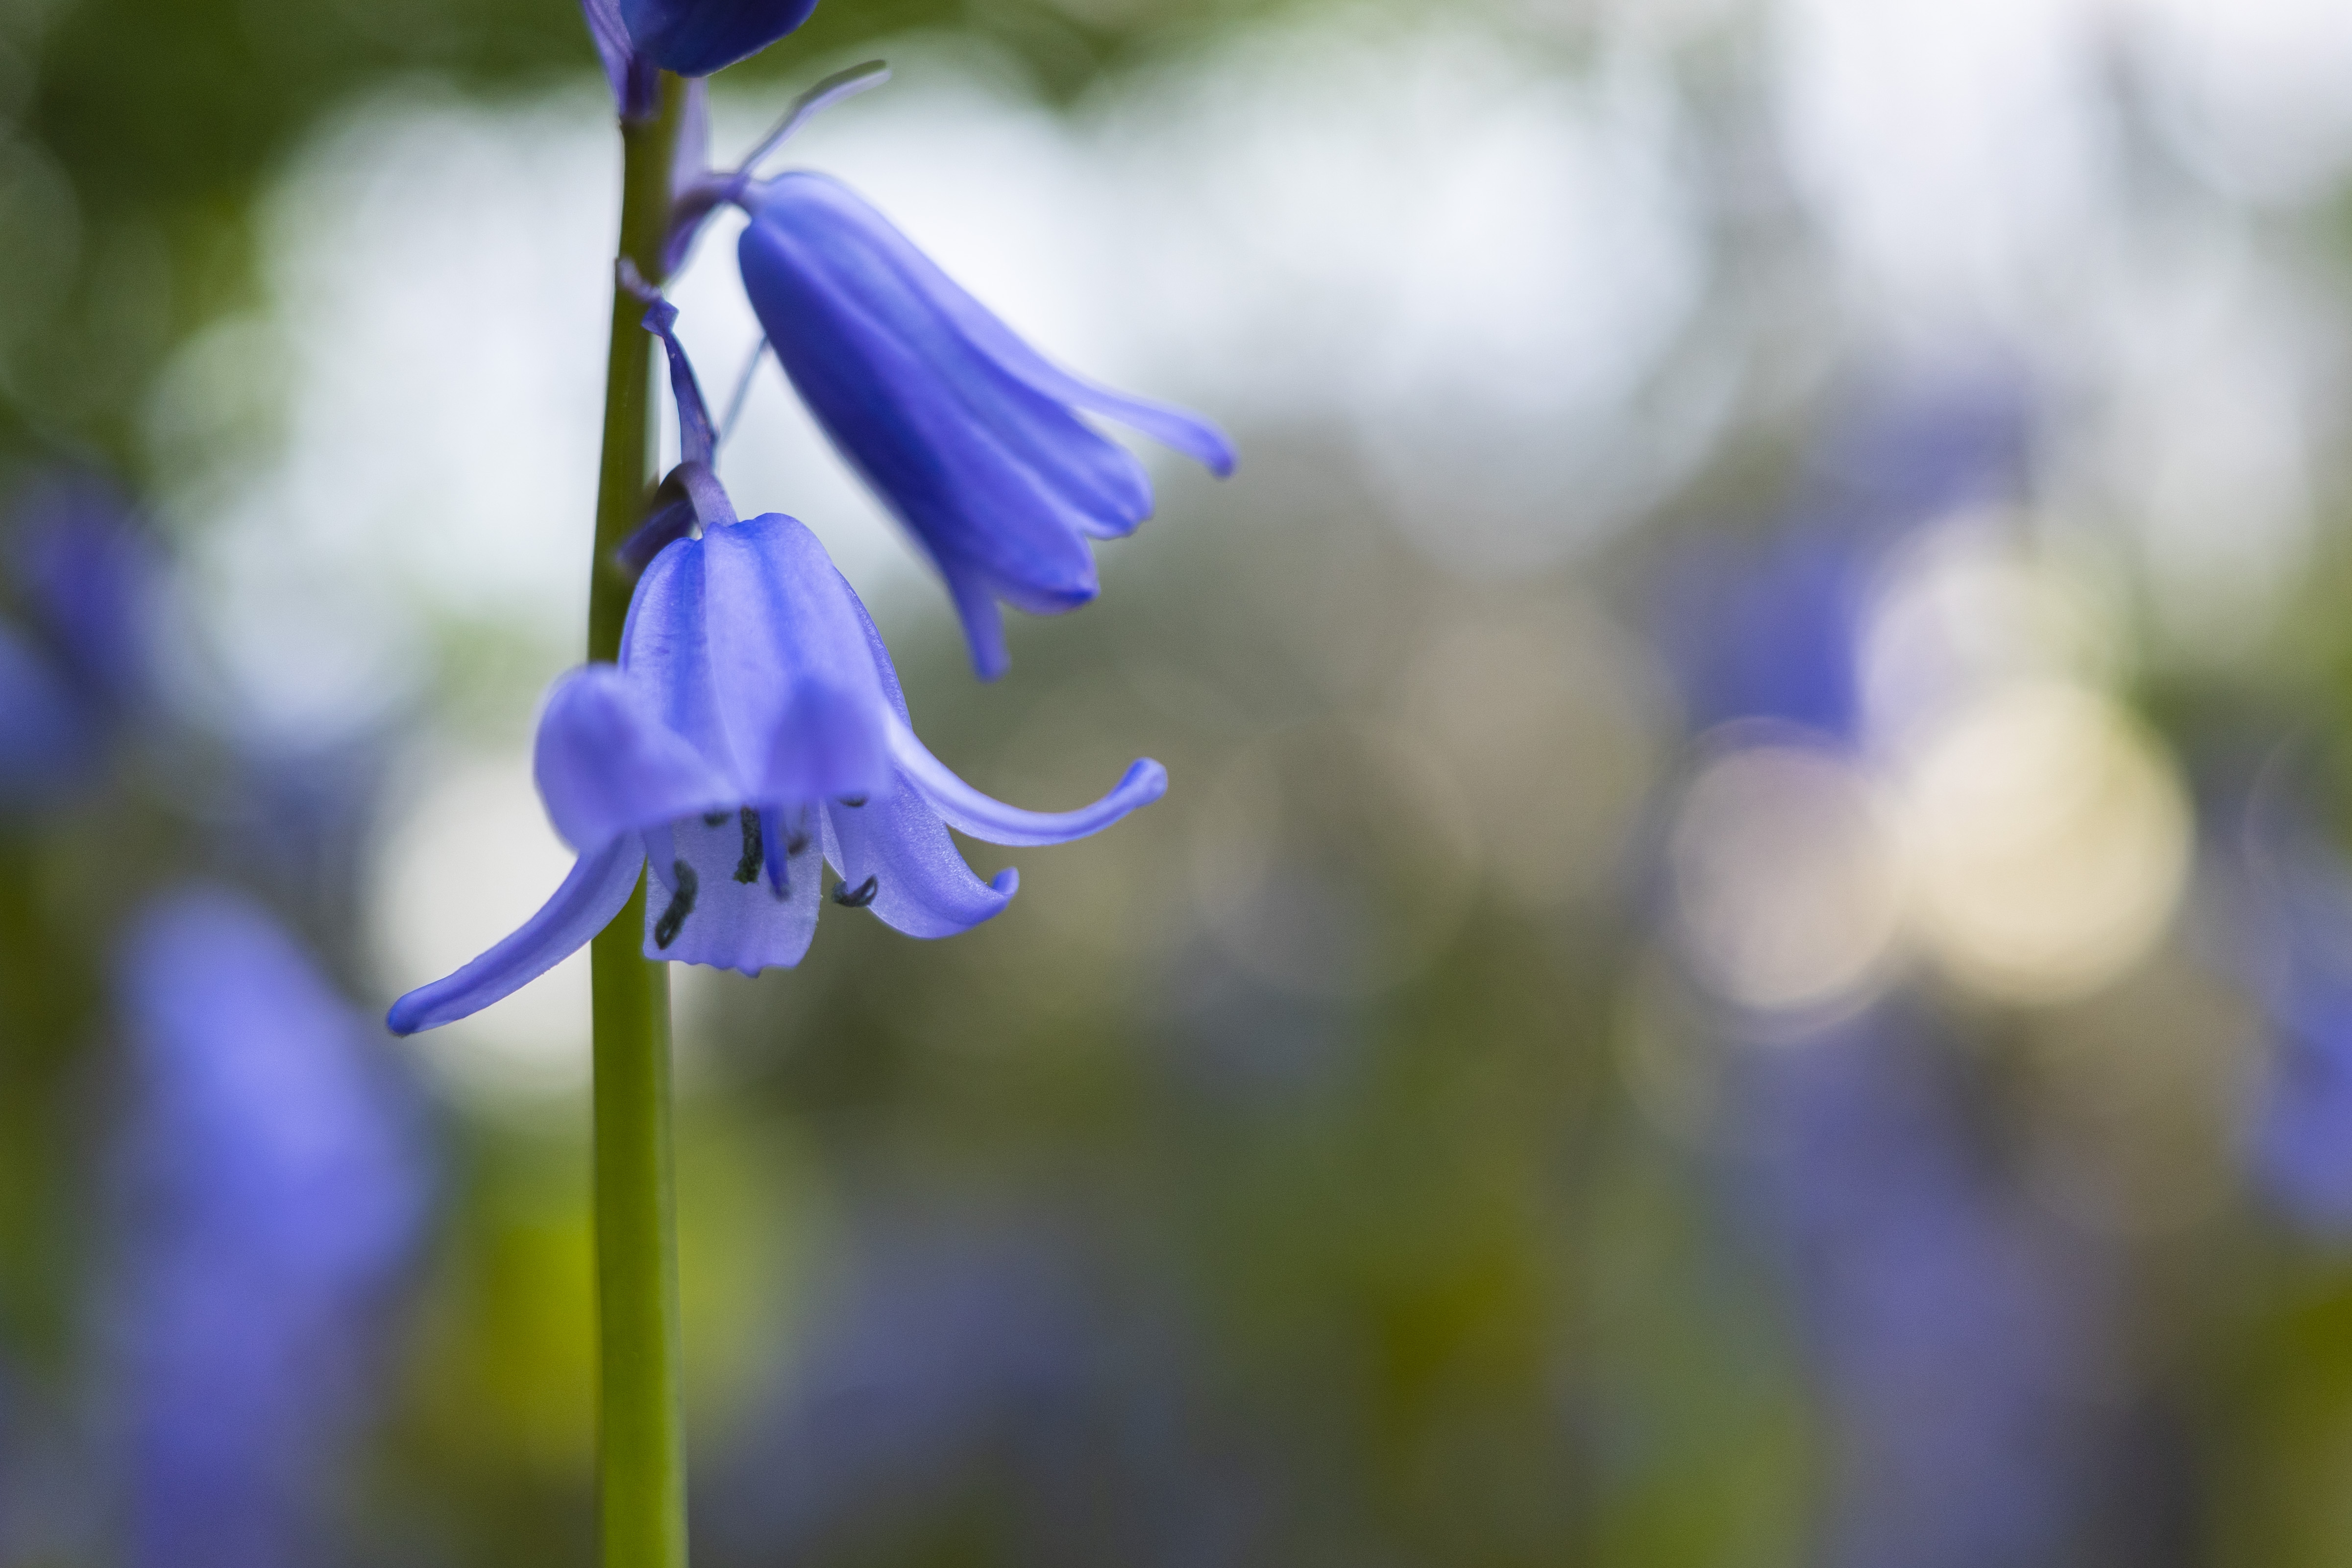 Two bluebells in a forest